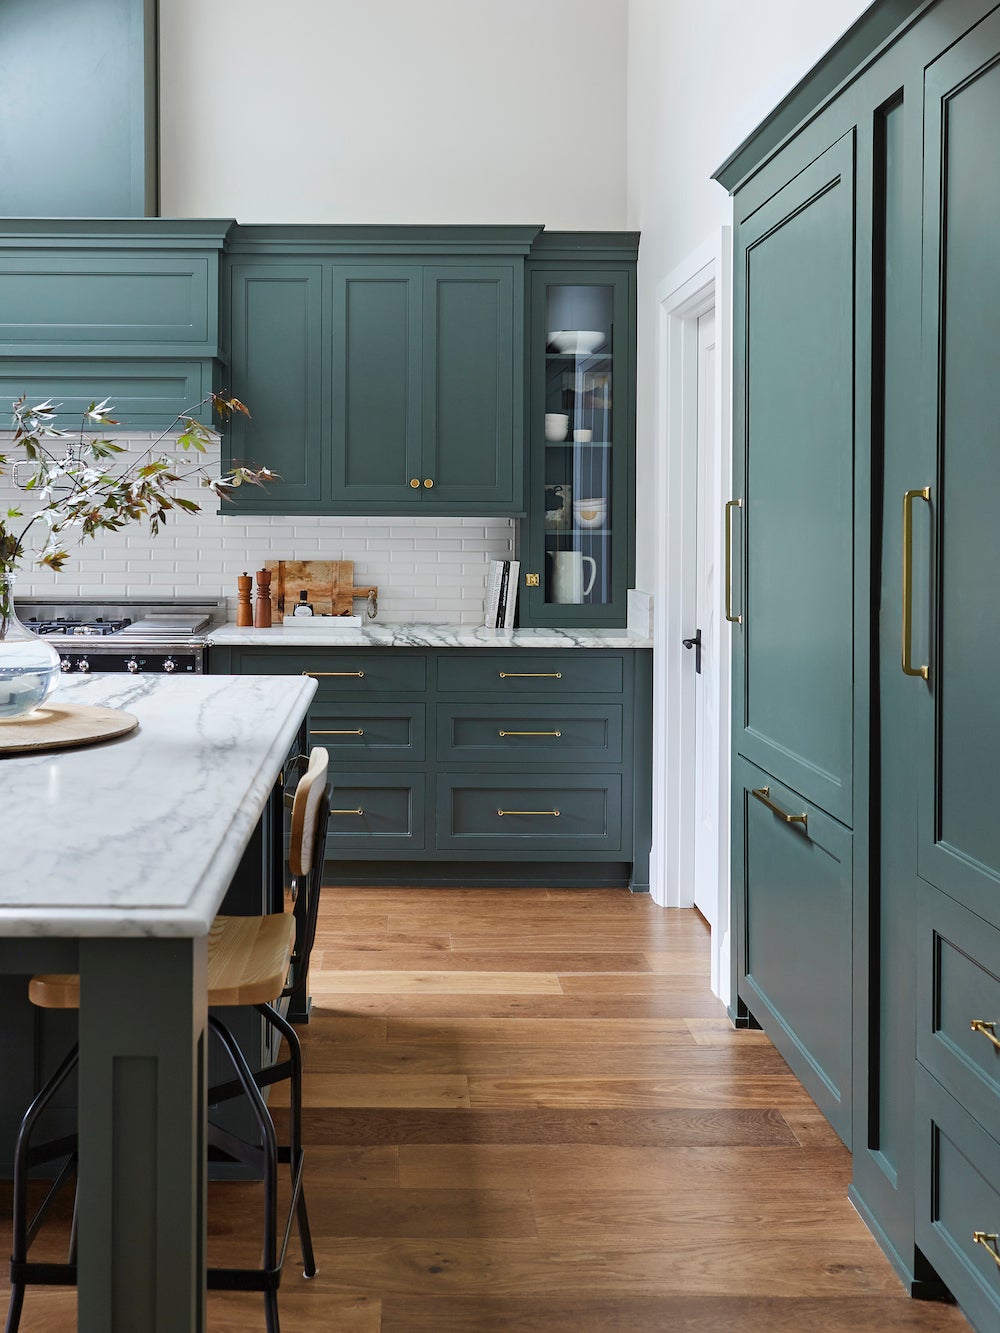 18 Paint Colors Designers Can't Wait to Use on Kitchen Cabinets